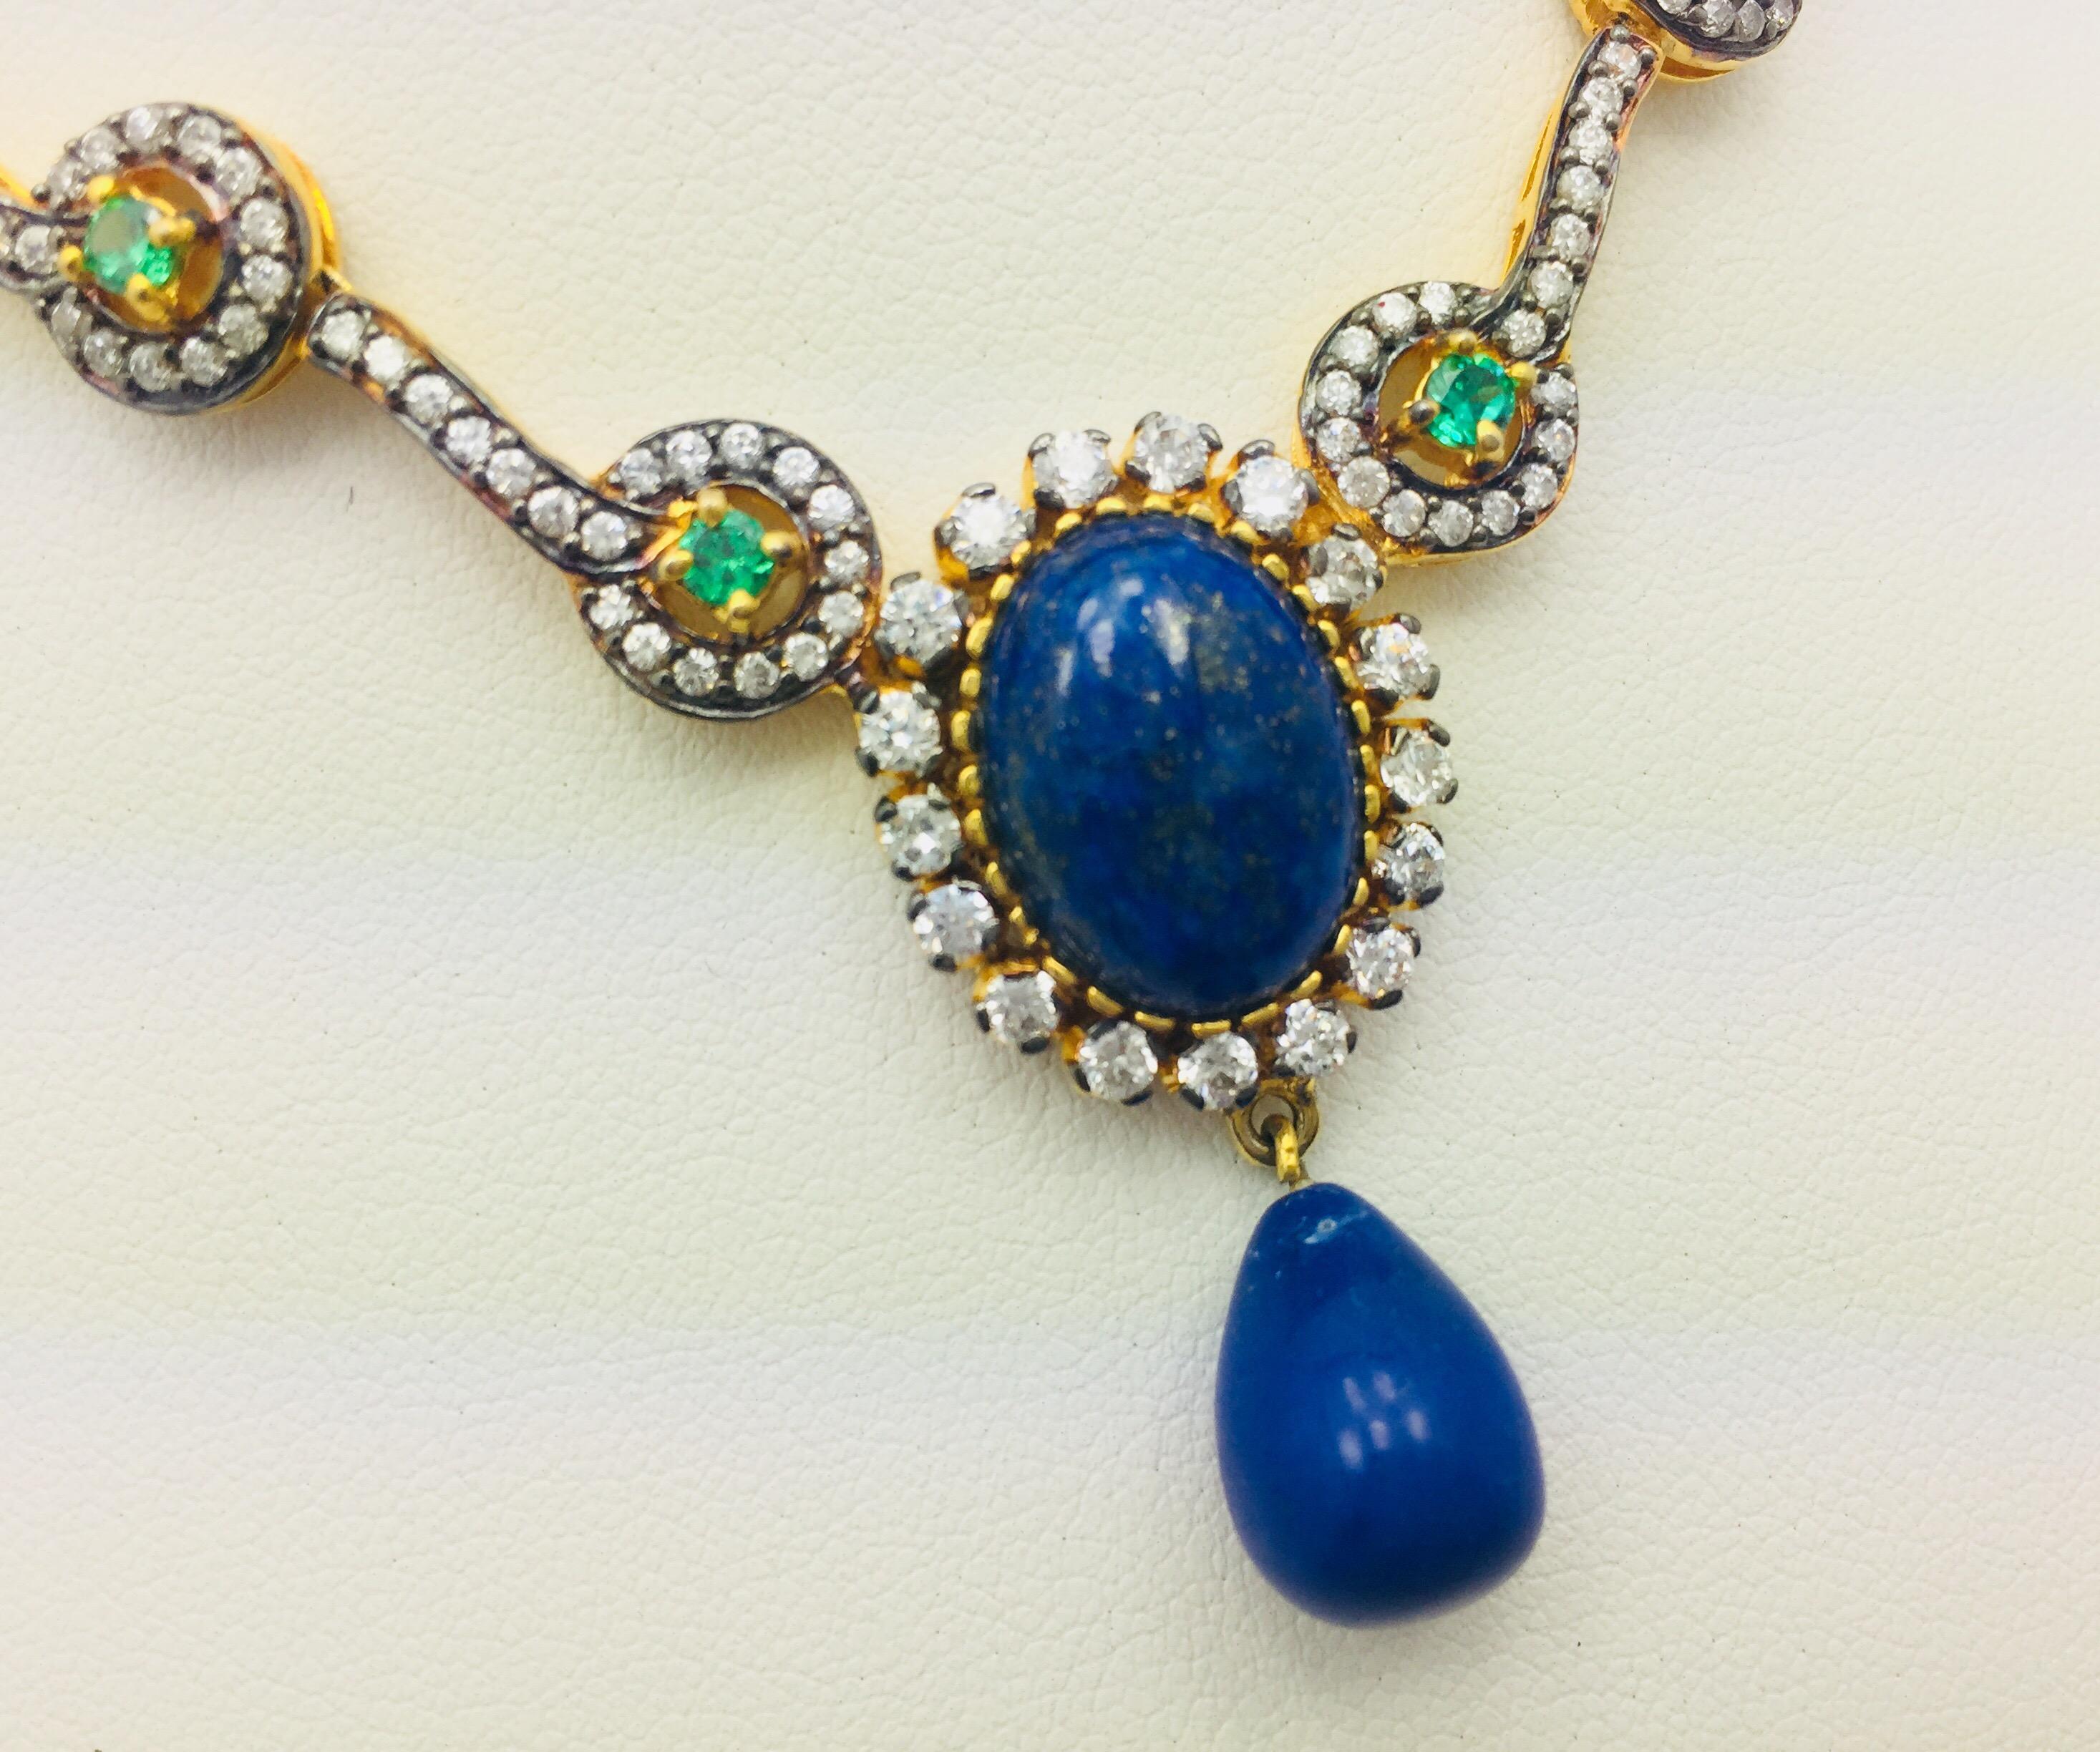 Handmade Faux Lapis and tsavorite necklace embellished with cubic zircon.  
Only 1 available.

FOLLOW  MEGHNA JEWELS storefront to view the latest collection & exclusive pieces.  Meghna Jewels is proudly rated as a Top Seller on 1stdibs with 5 star